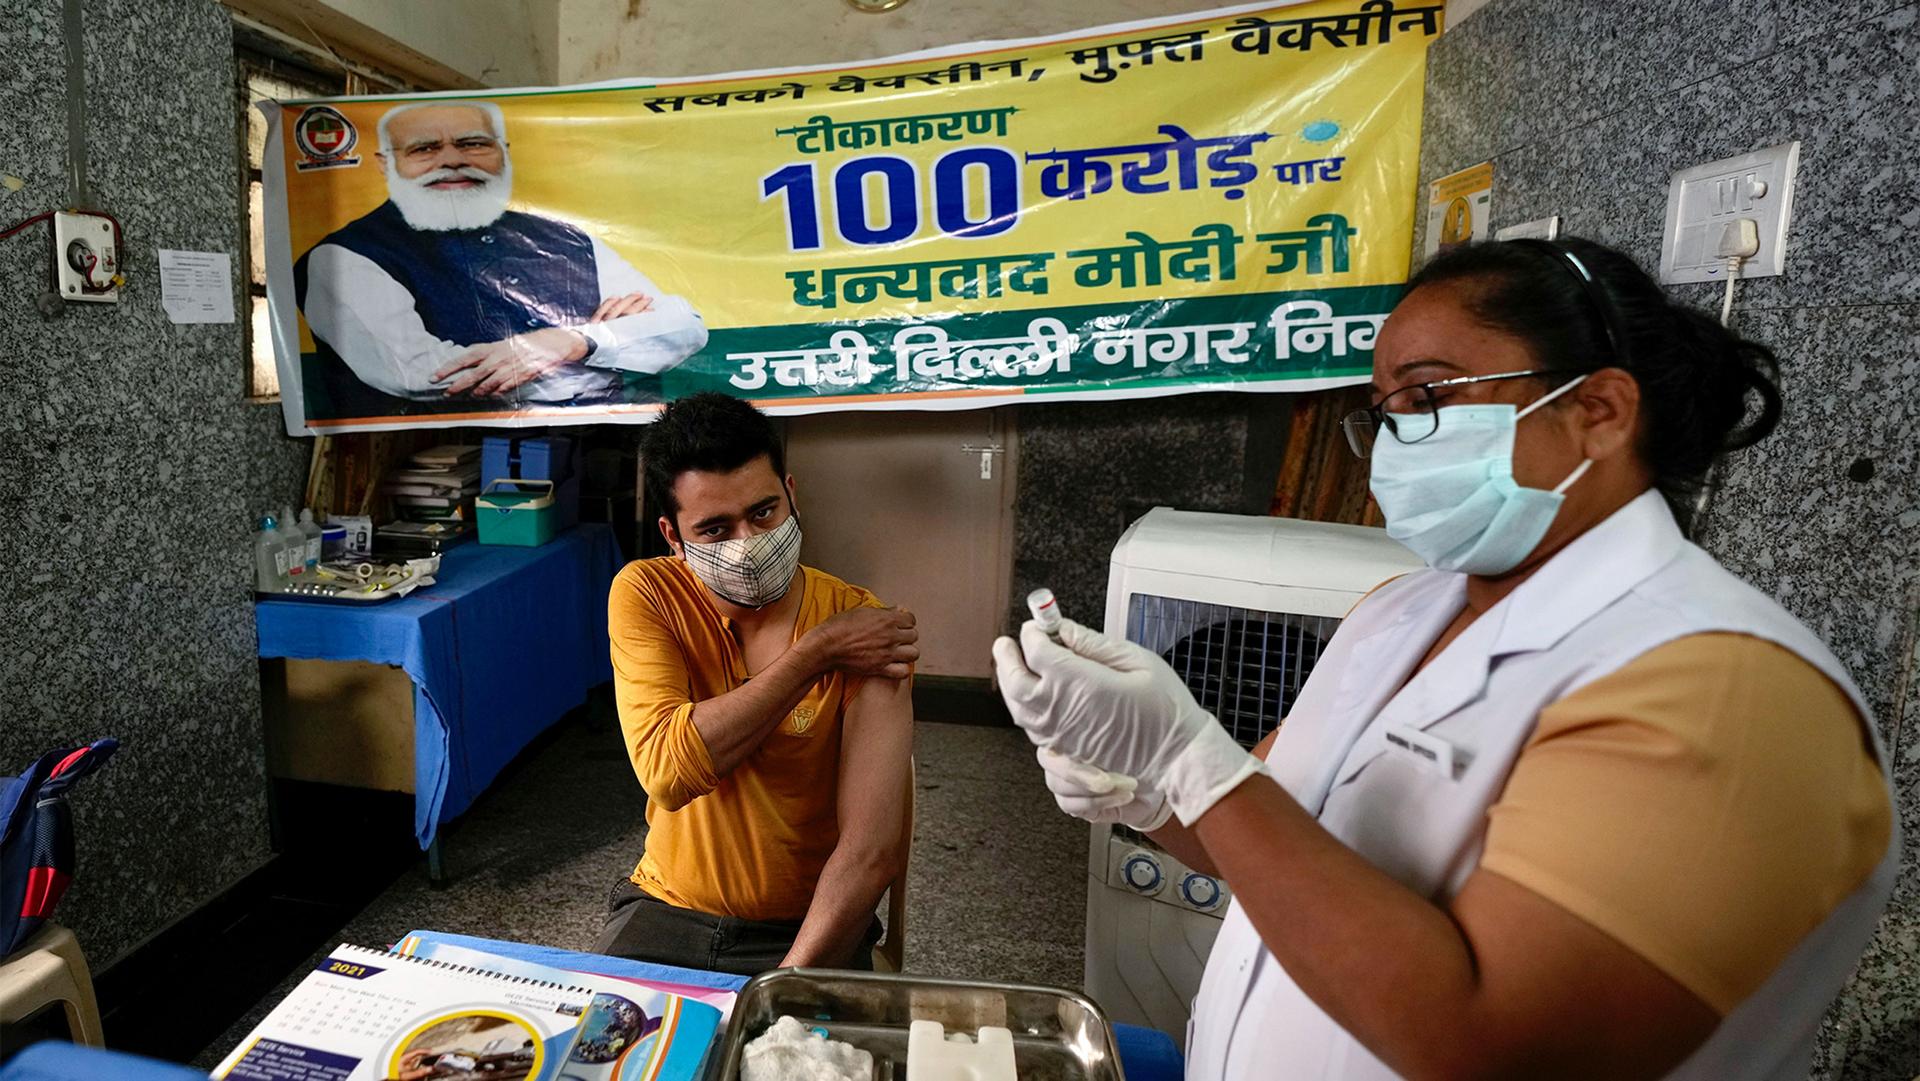 A health worker inoculates a man next to a banner thanking Prime Minister Narendra Modi for 1 billion doses of COVID-19 vaccine at a government hospital in New Delhi, India